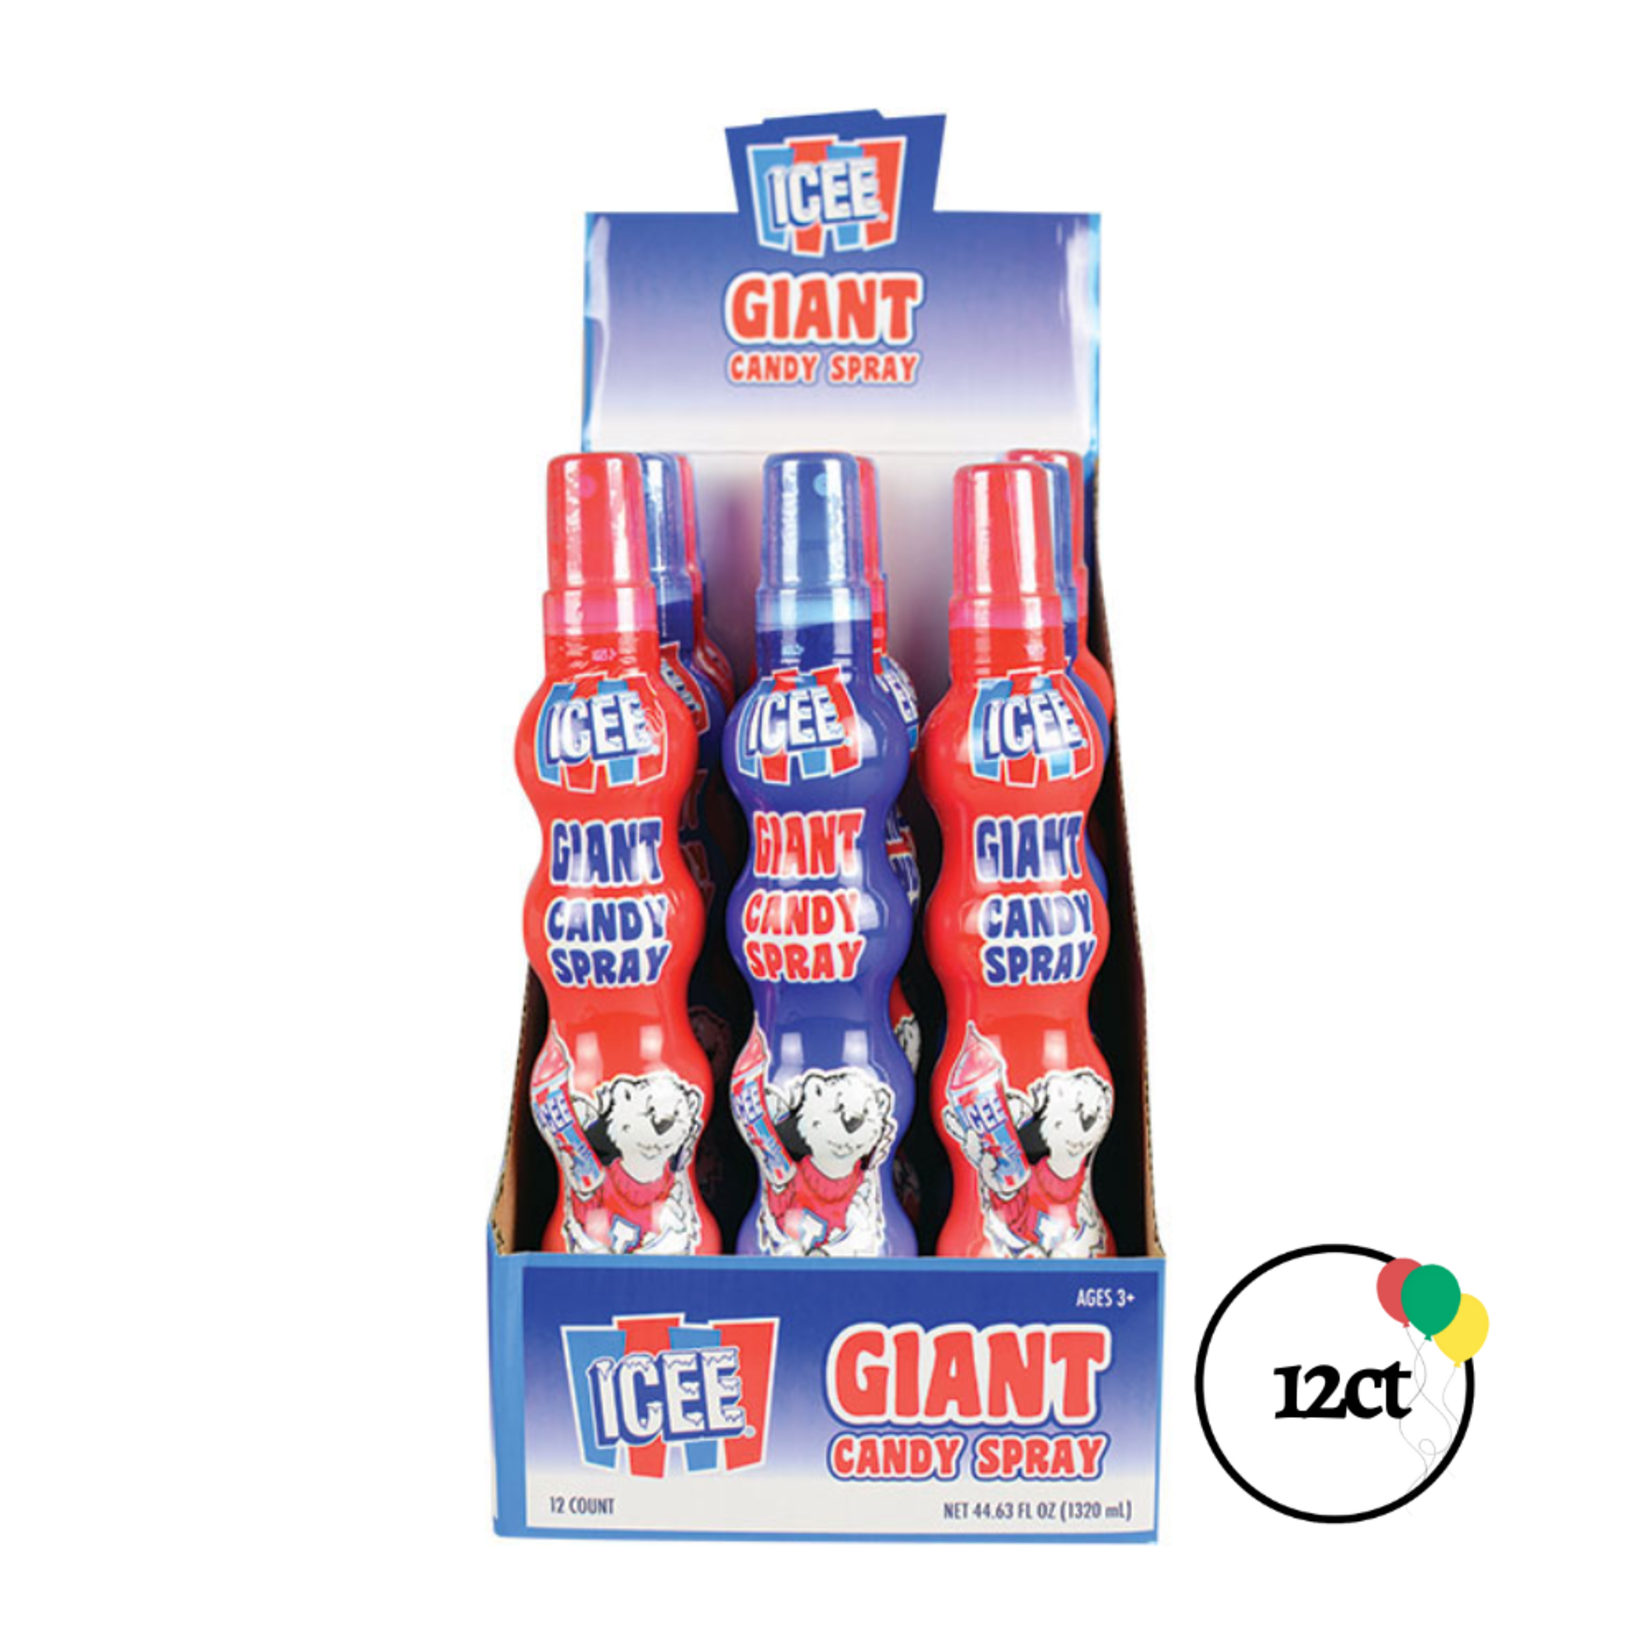 ICEE Giant Candy Spray 12ct